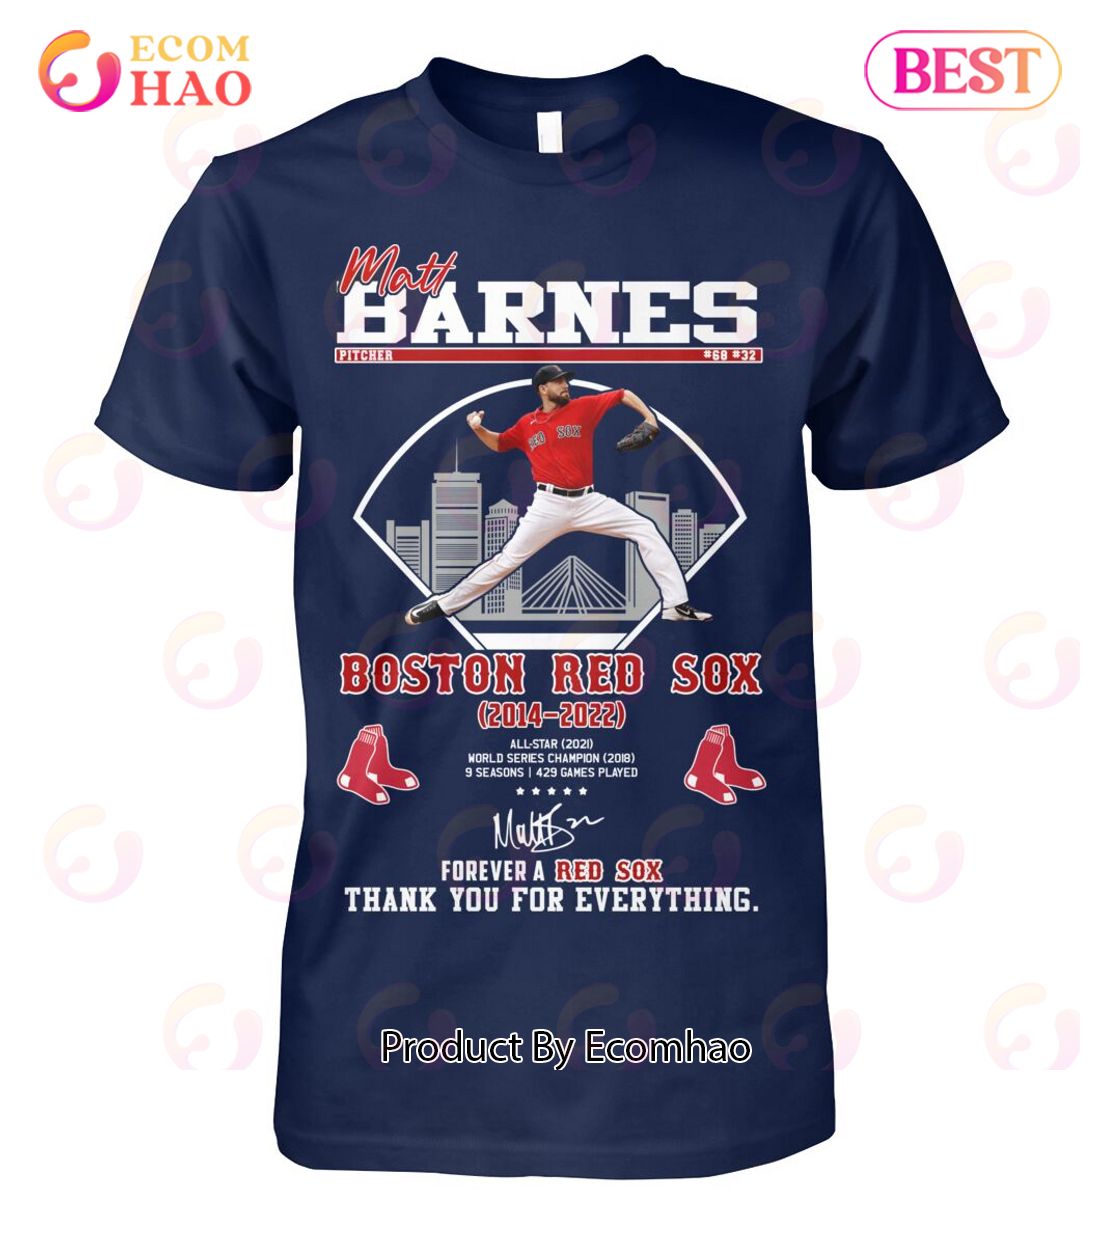 Matt Barnes Boston Red Sox 2014 – 2022 Forever A Red Sox Thank You For Everything T-Shirt